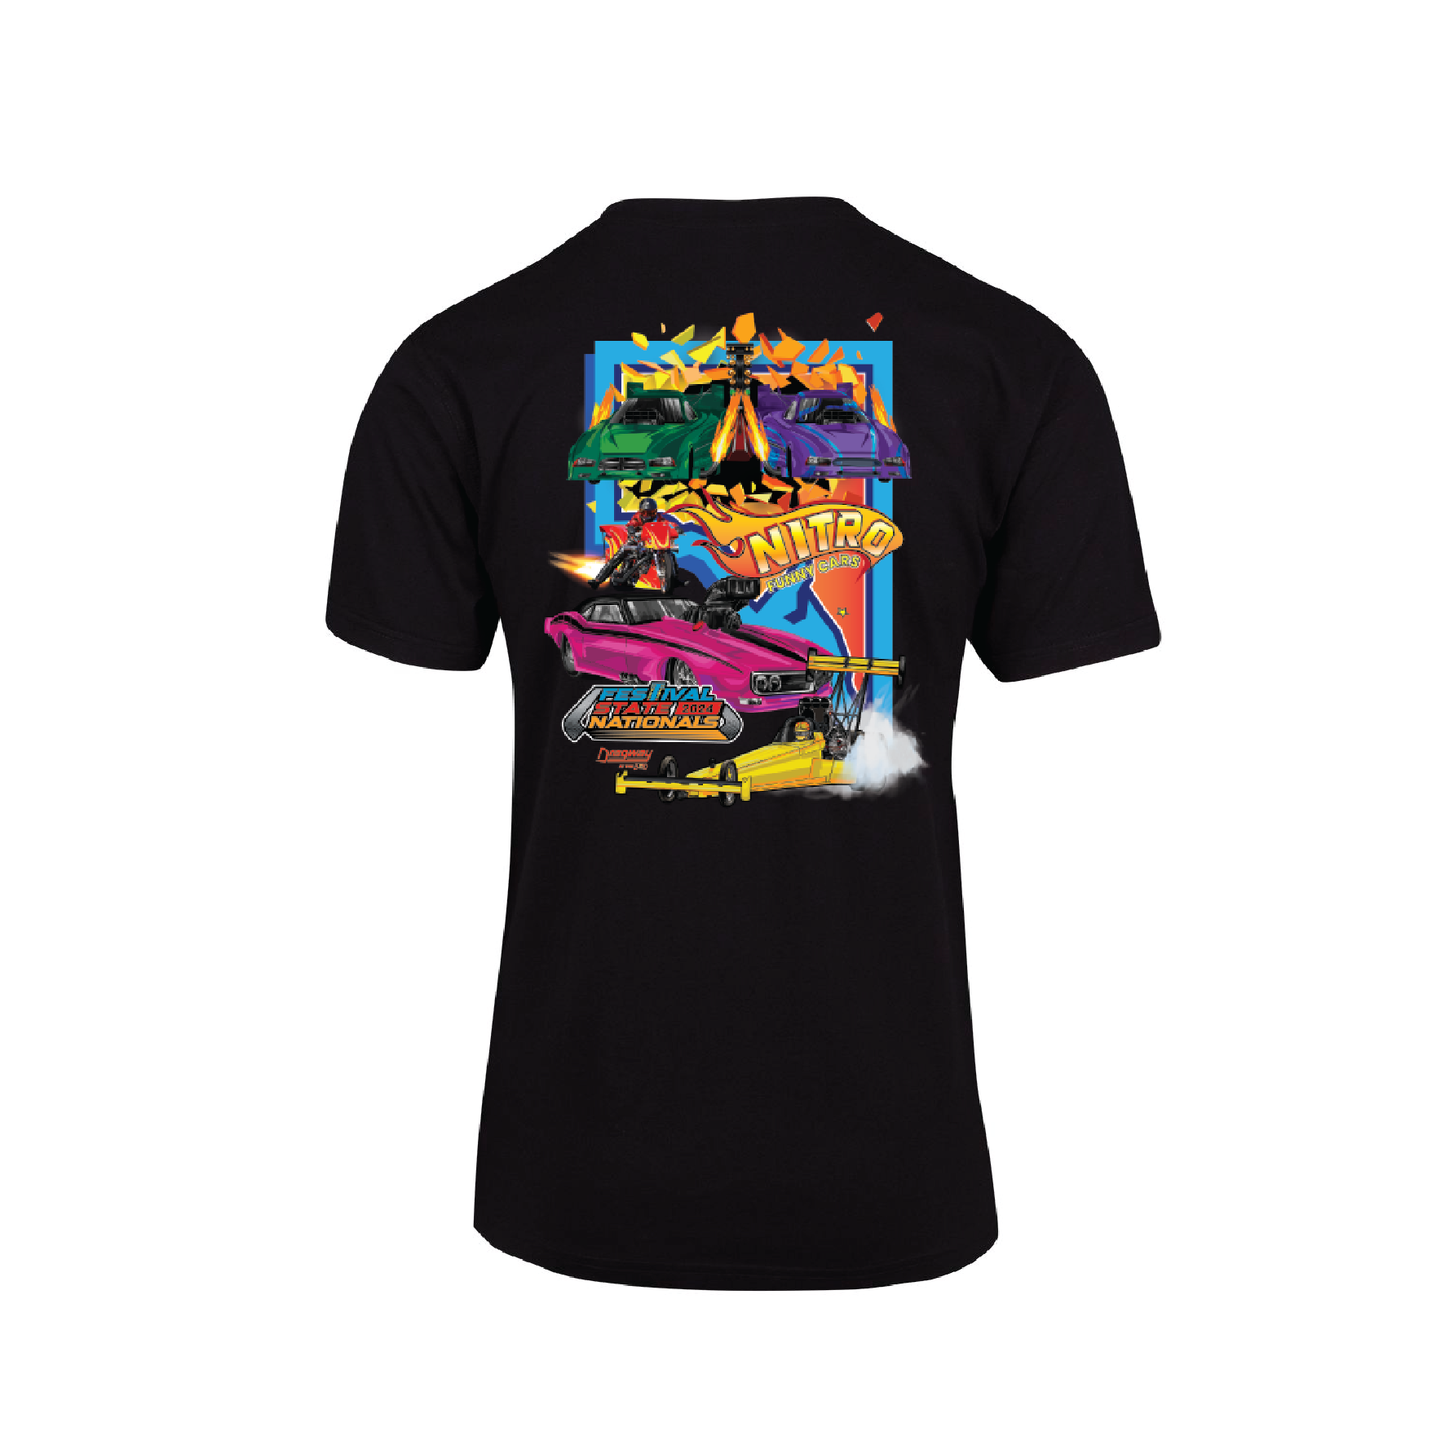 FESTIVAL STATE NATIONALS TEE BLACK - MENS